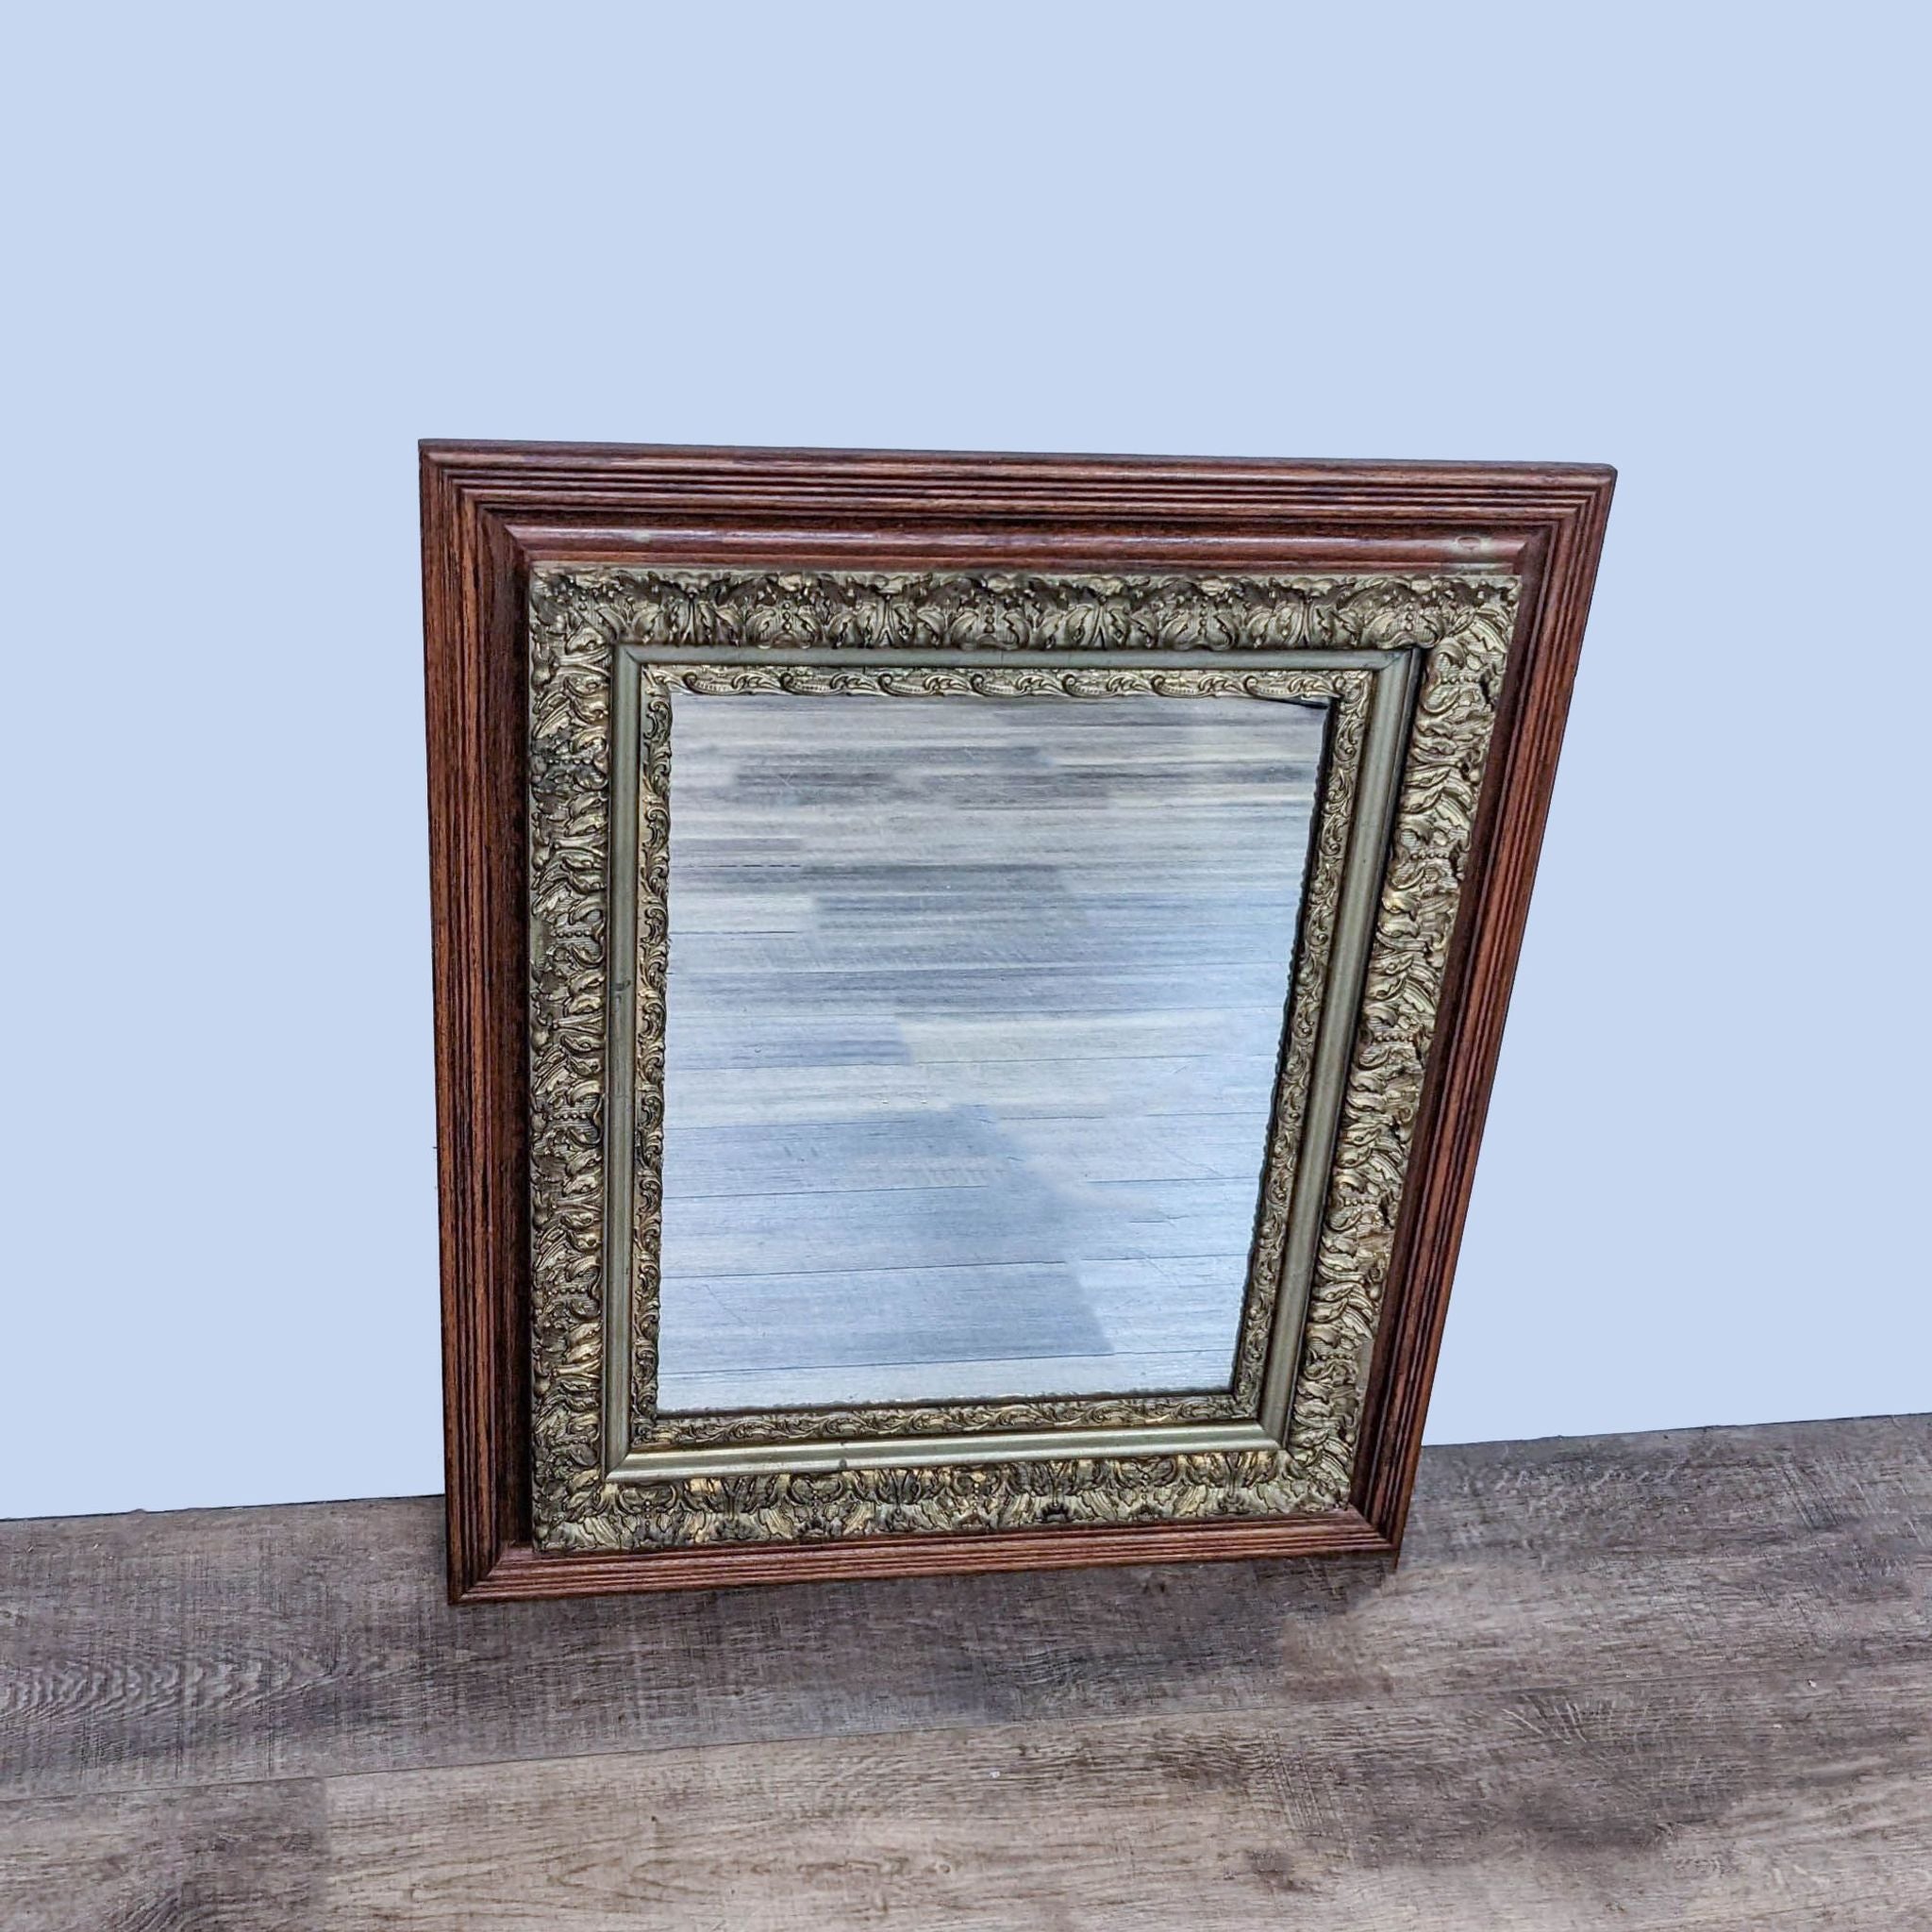 Reperch brand wall mirror with ornate wooden frame on a wooden floor against a plain background.